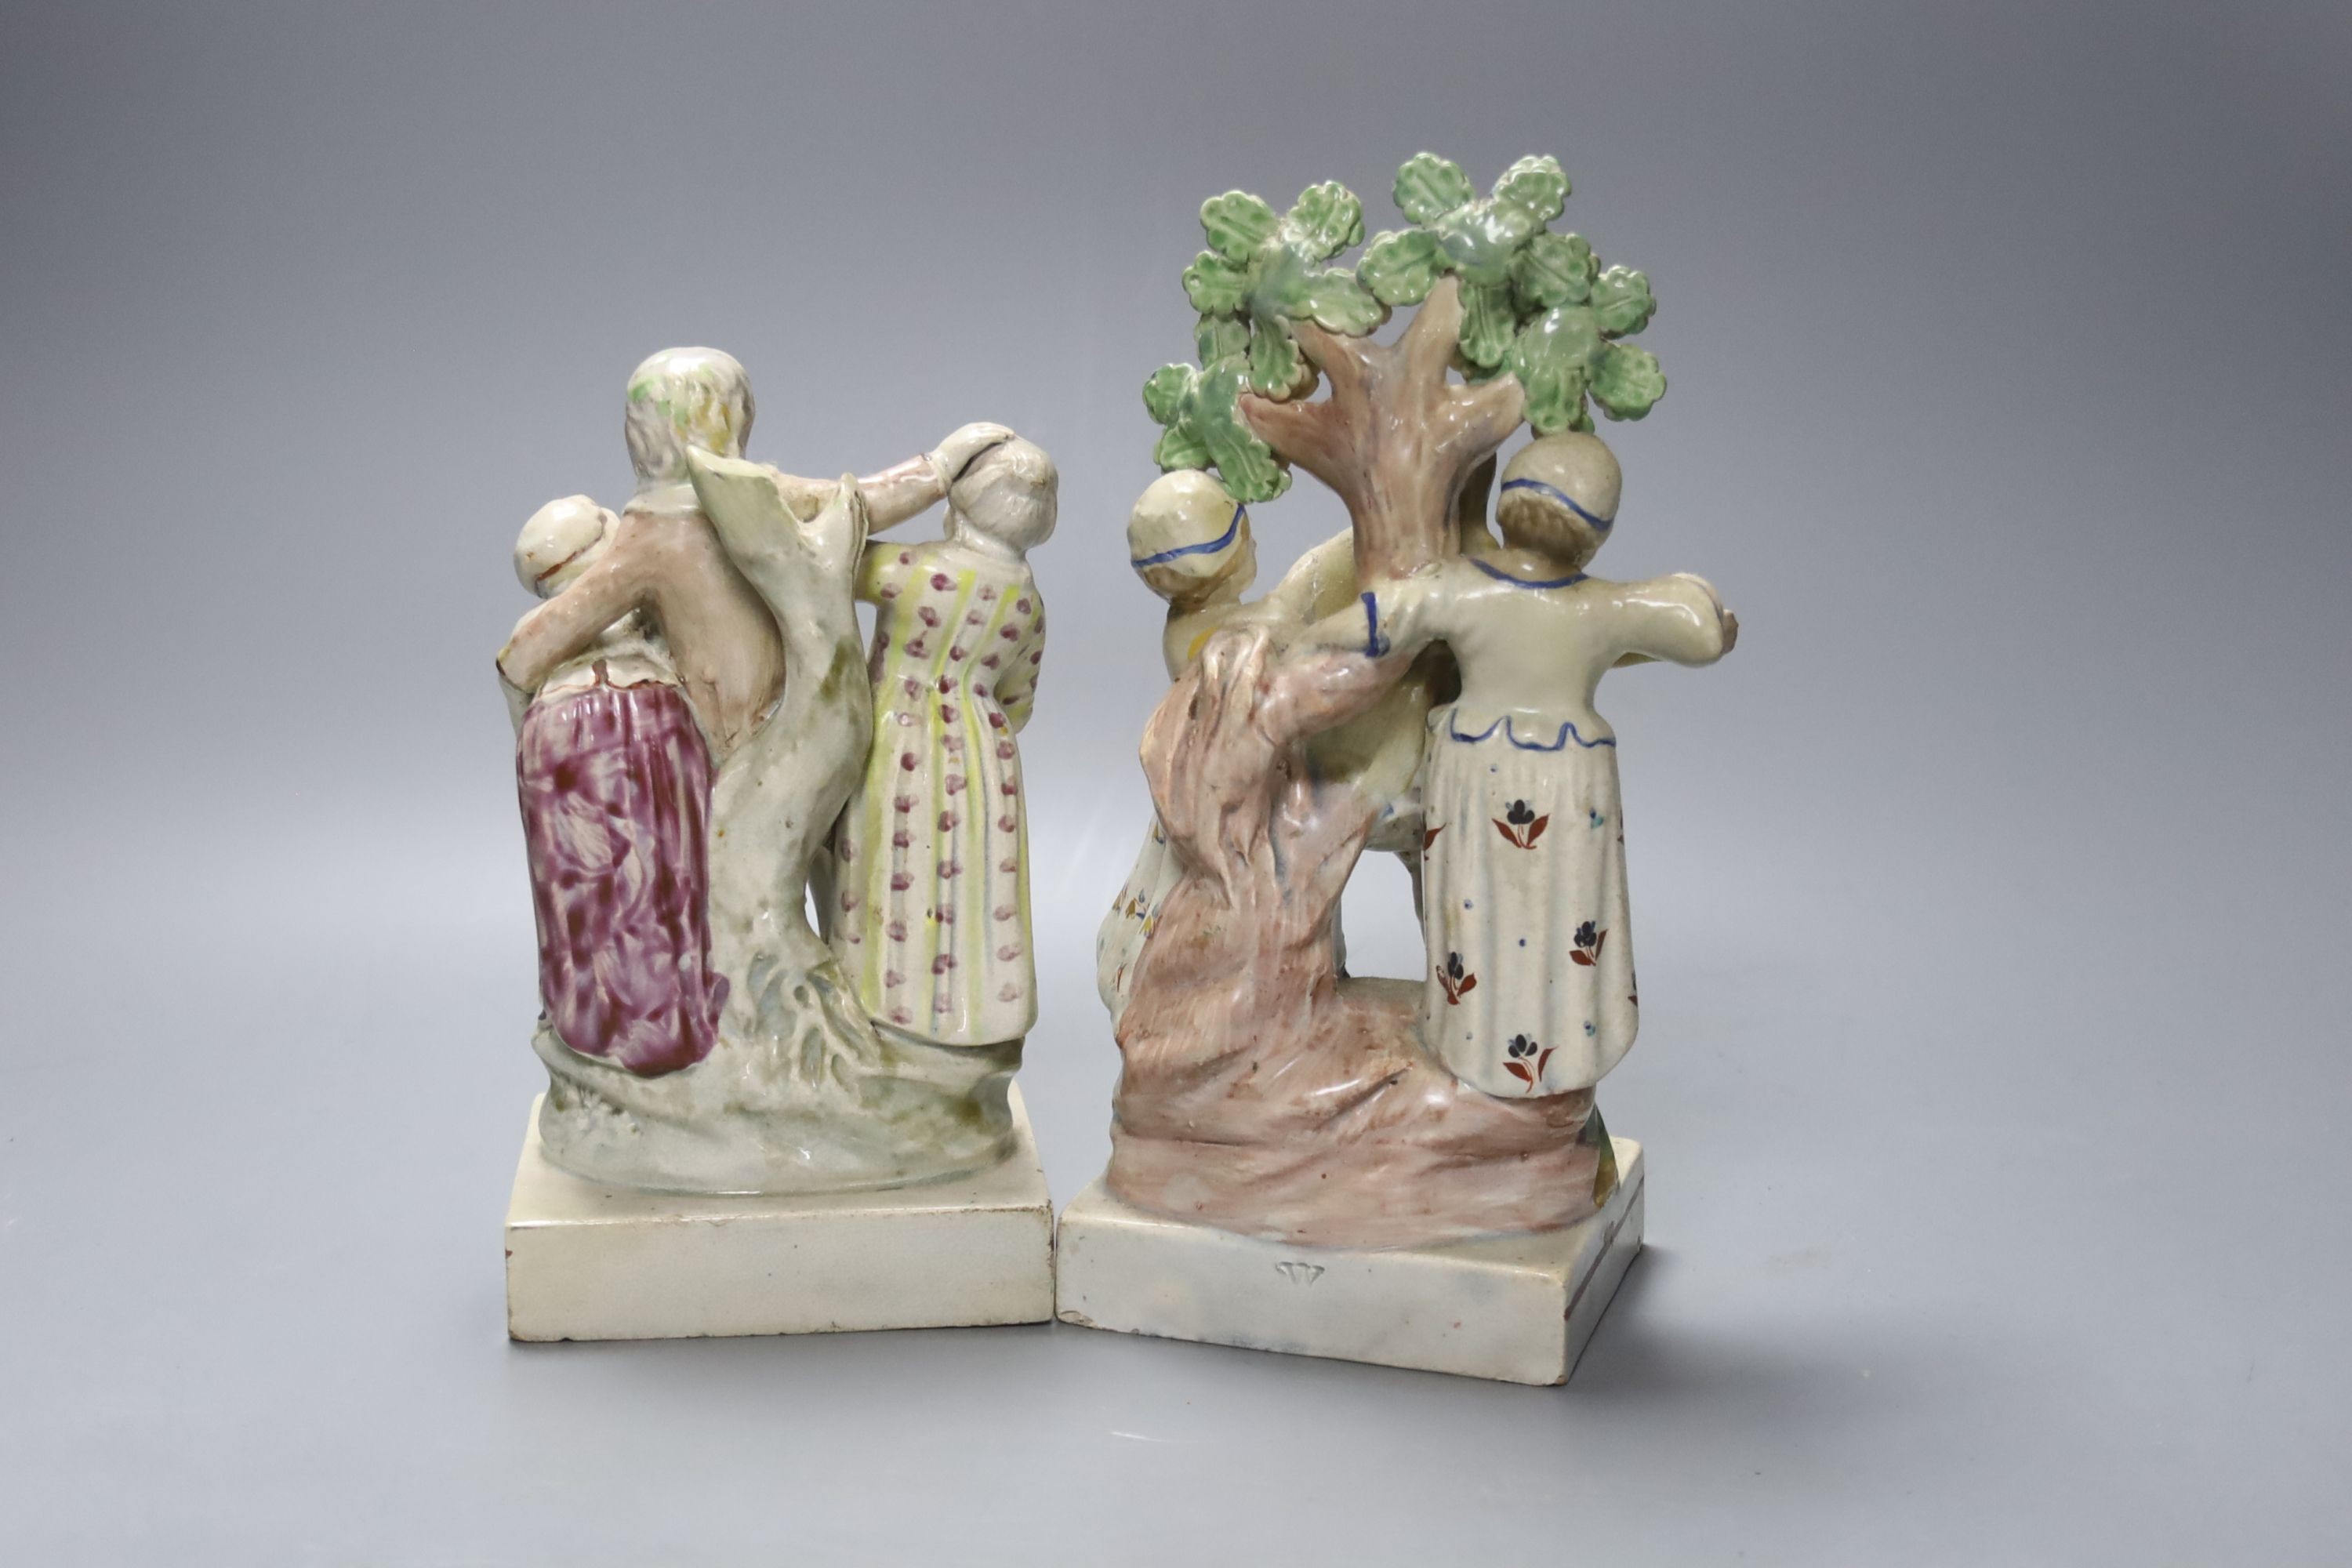 An early 19th century Ralph Wood Staffordshire group 'No Contest', 17.5cm and a similar bocage group, 'Scuffle', 21cm